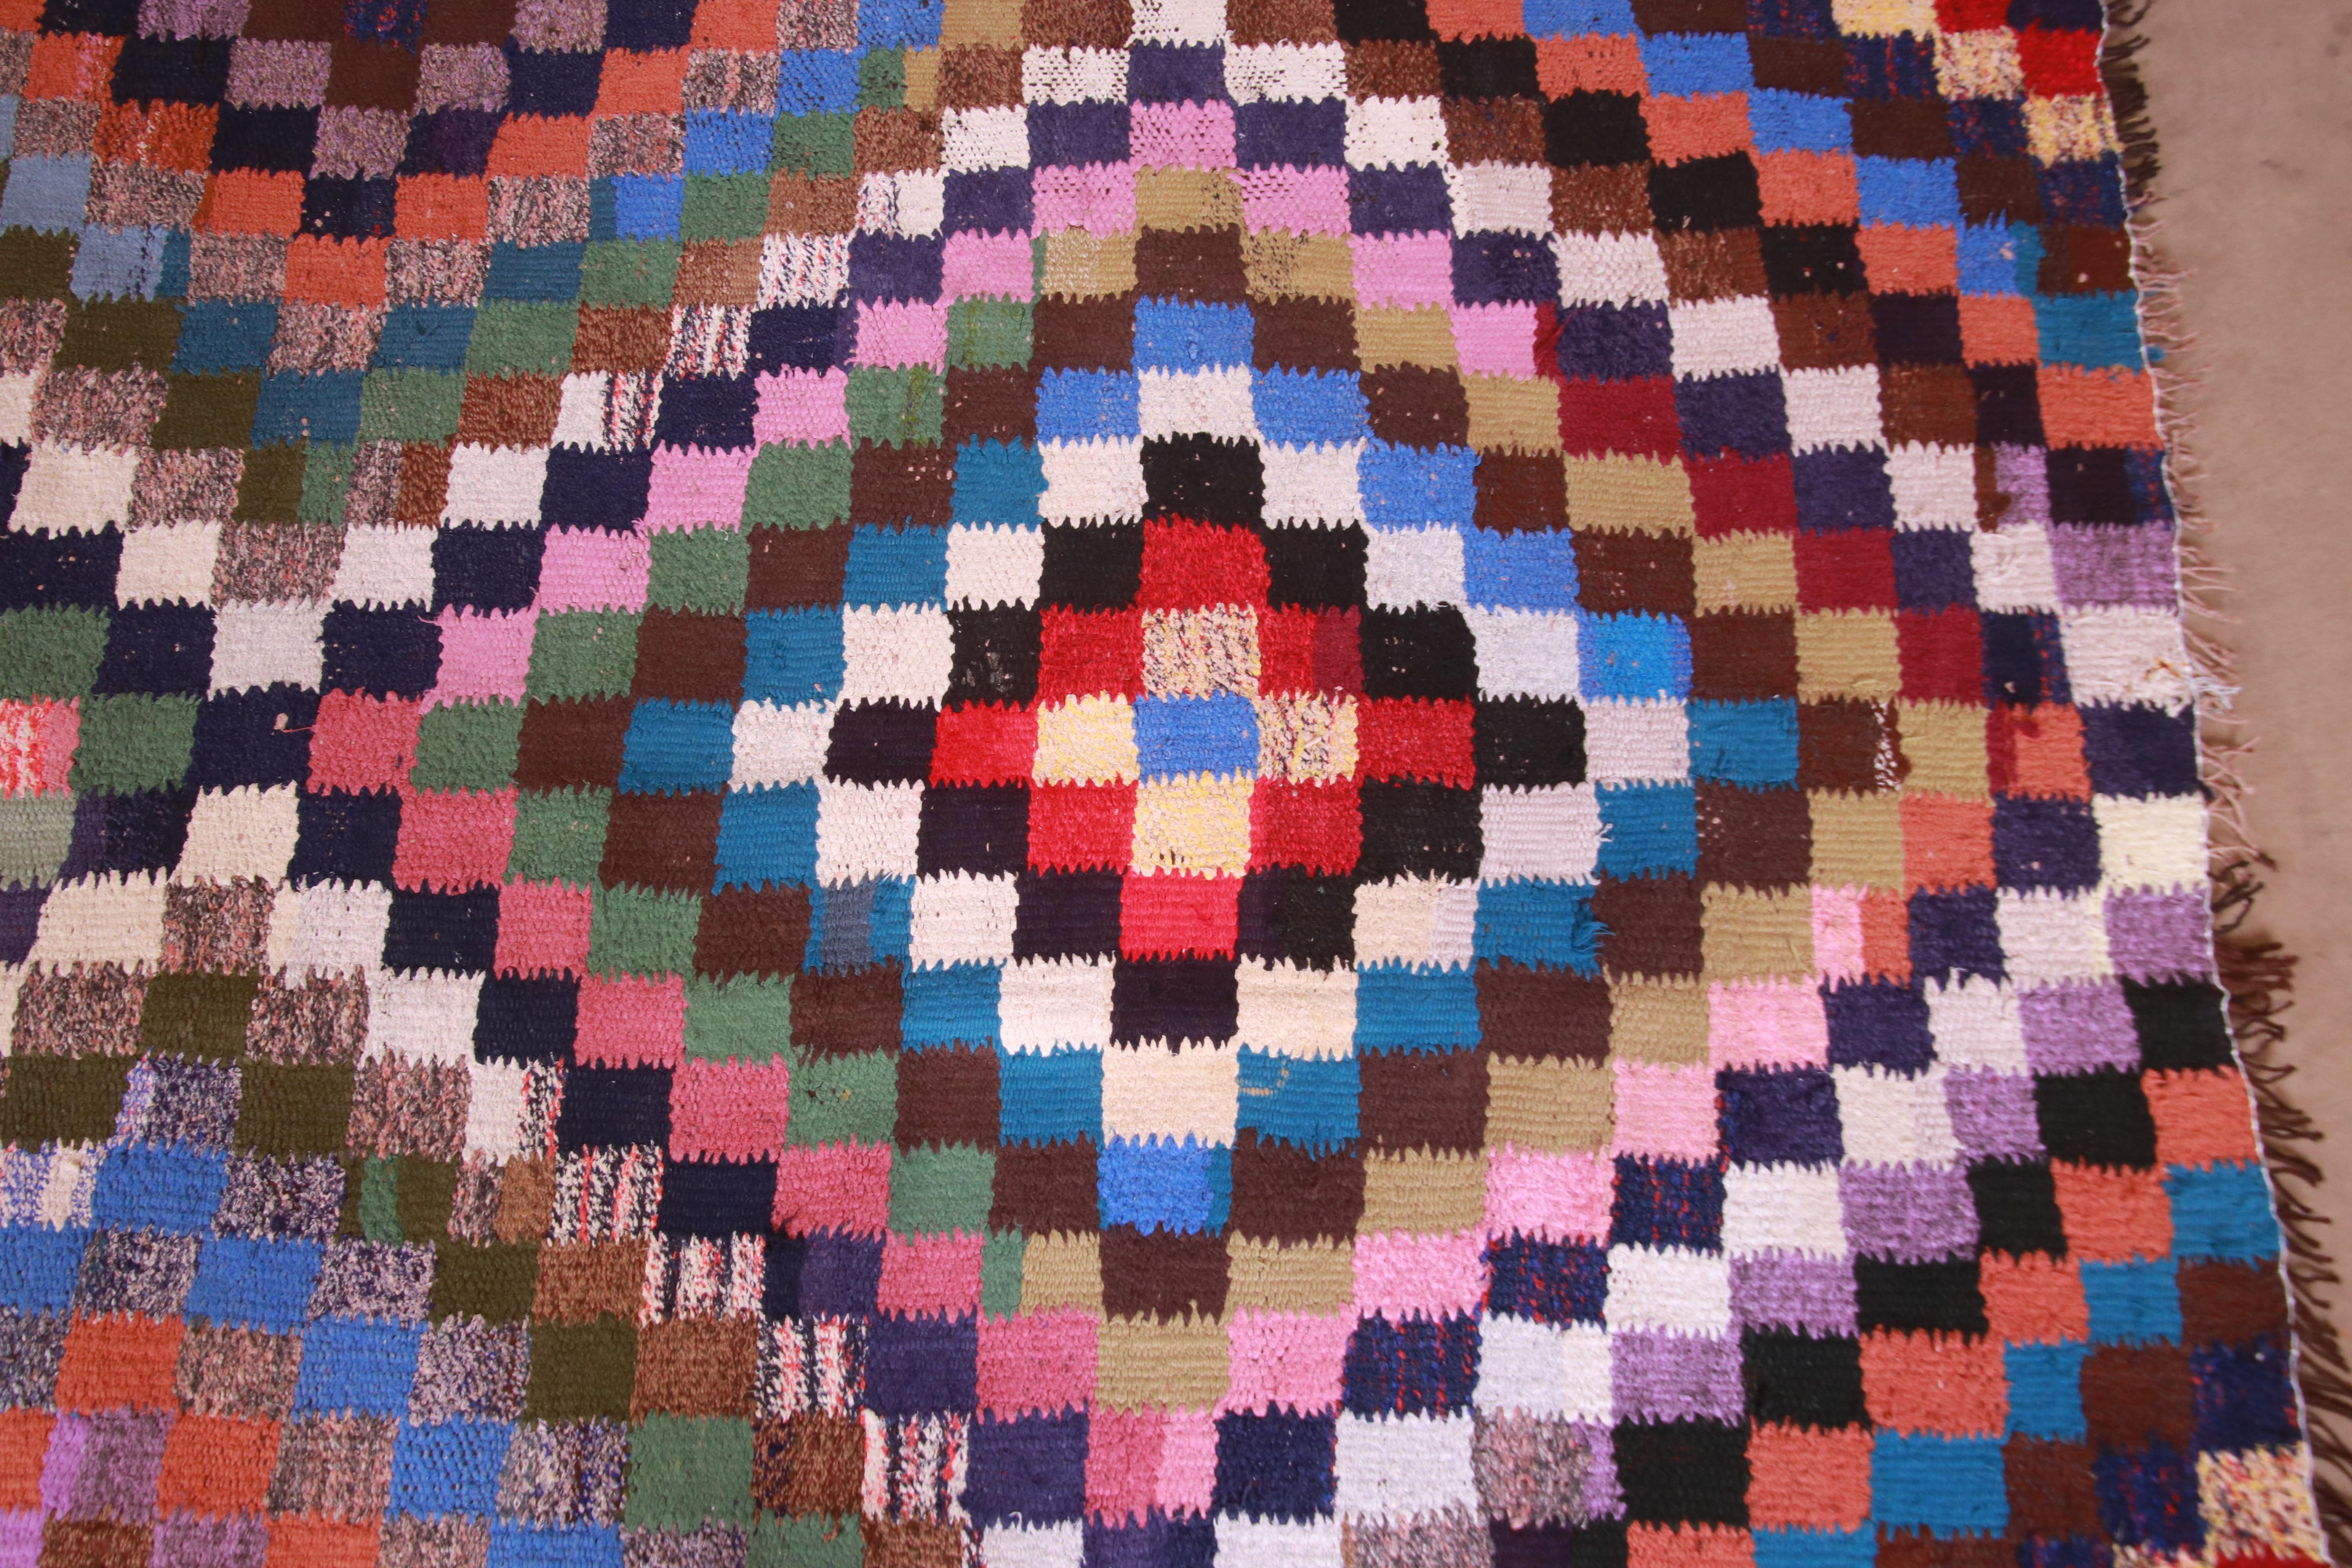 Vintage Handwoven Persian Kilim Rug with Vibrant Colors 1